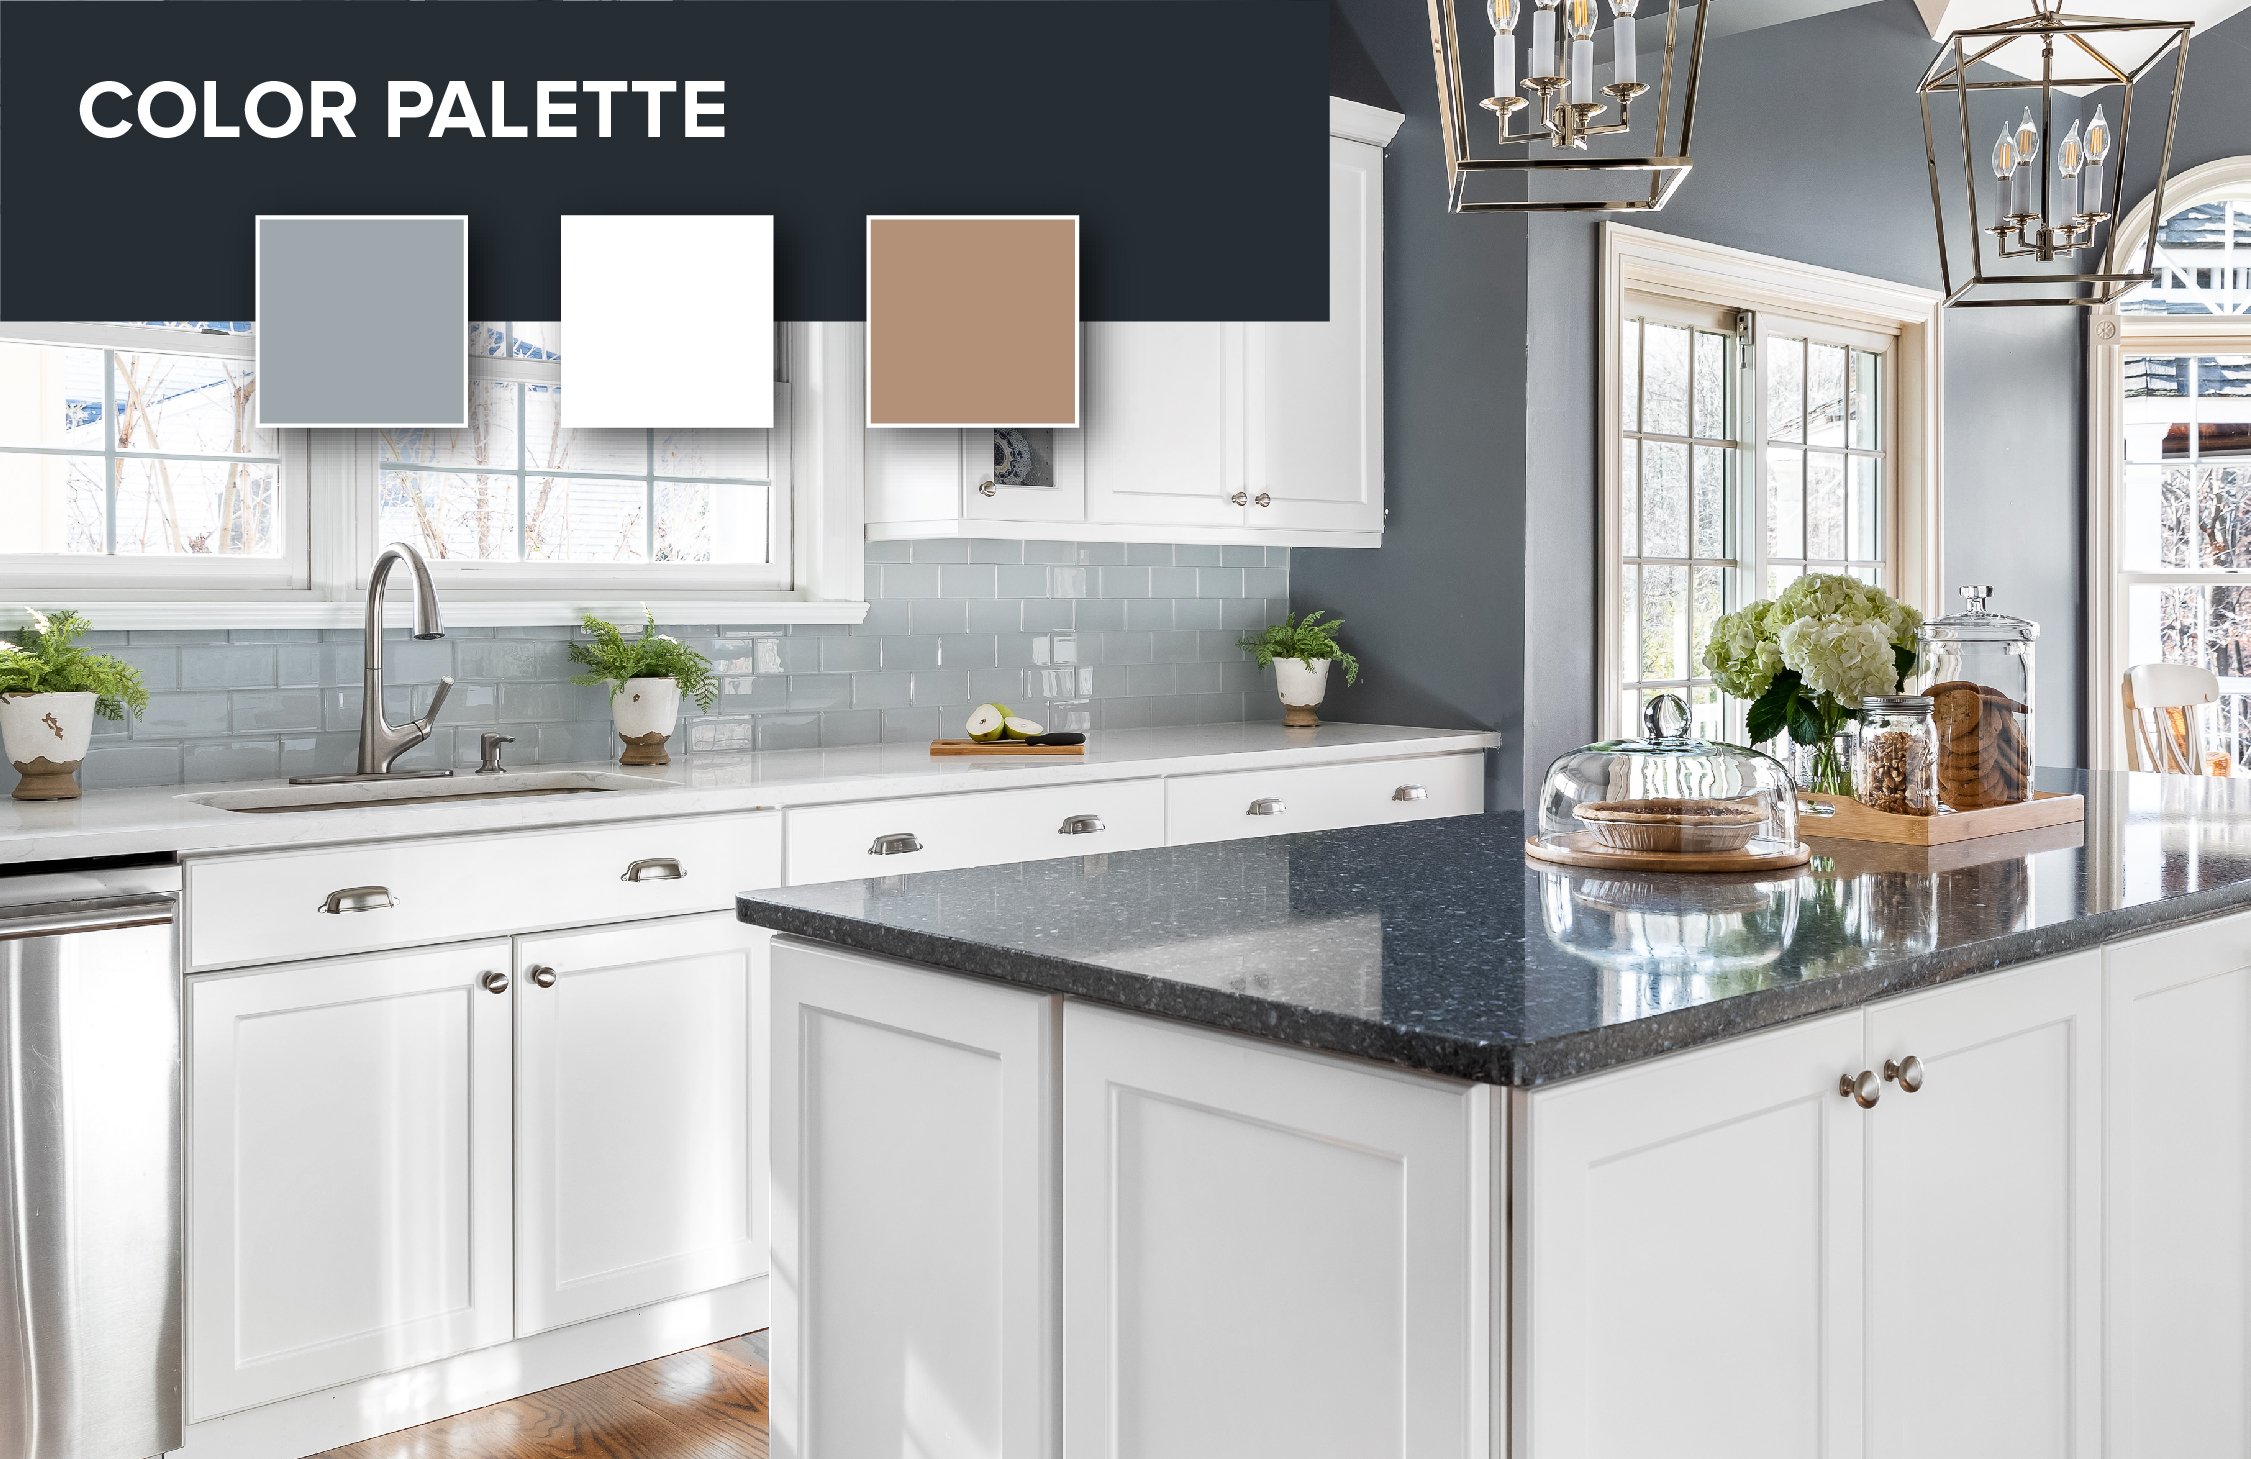 Countertops Cabinets And Floors, What Color Countertops Go Good With Grey Cabinets